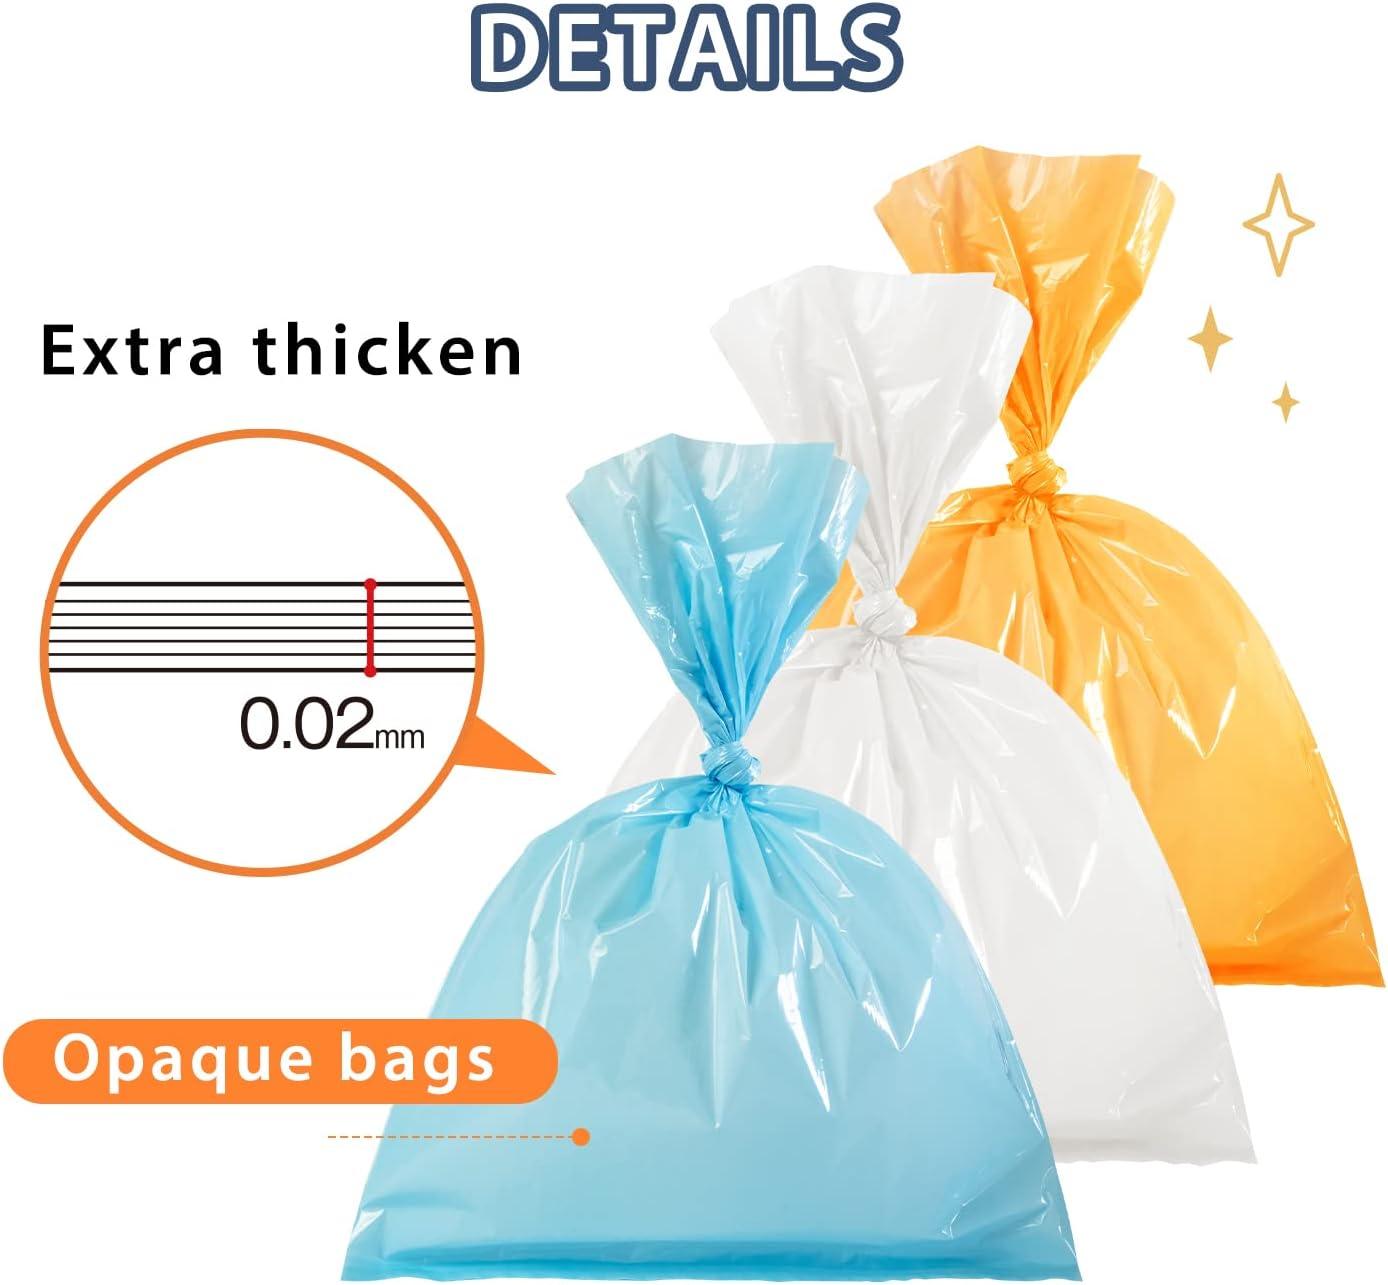 Bos Amazing Odor Sealing Baby Disposable Diaper Bags, Also for Pet Waste or Any